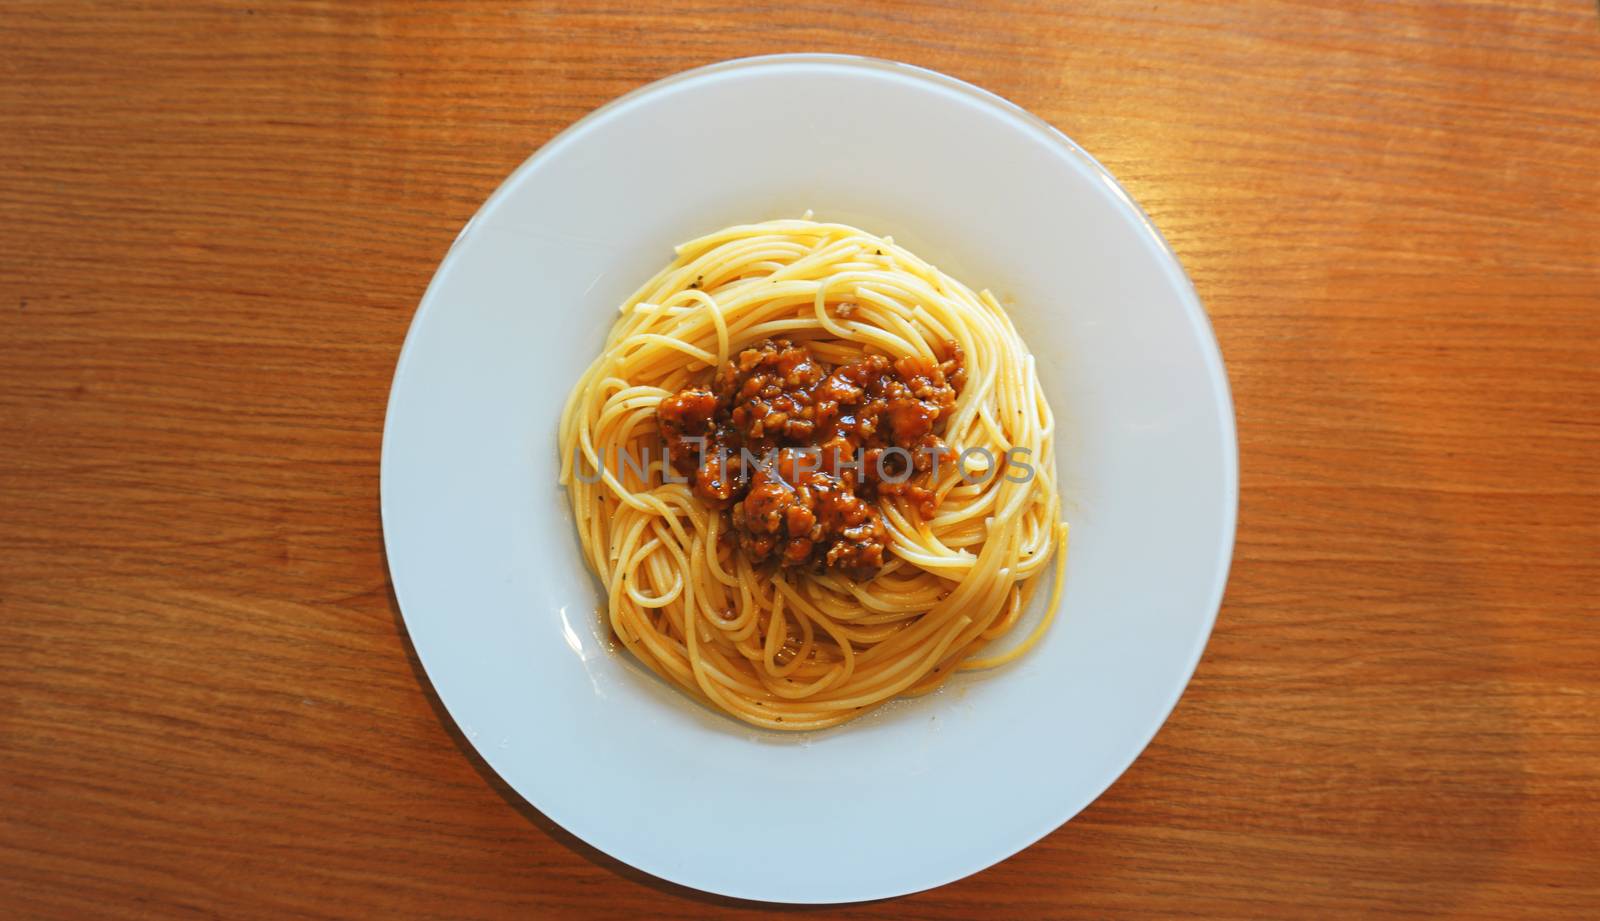 Plate of delicious spaghetti Bolognaise or Bolognese with savory minced beef and tomato sauce garnished, overhead view